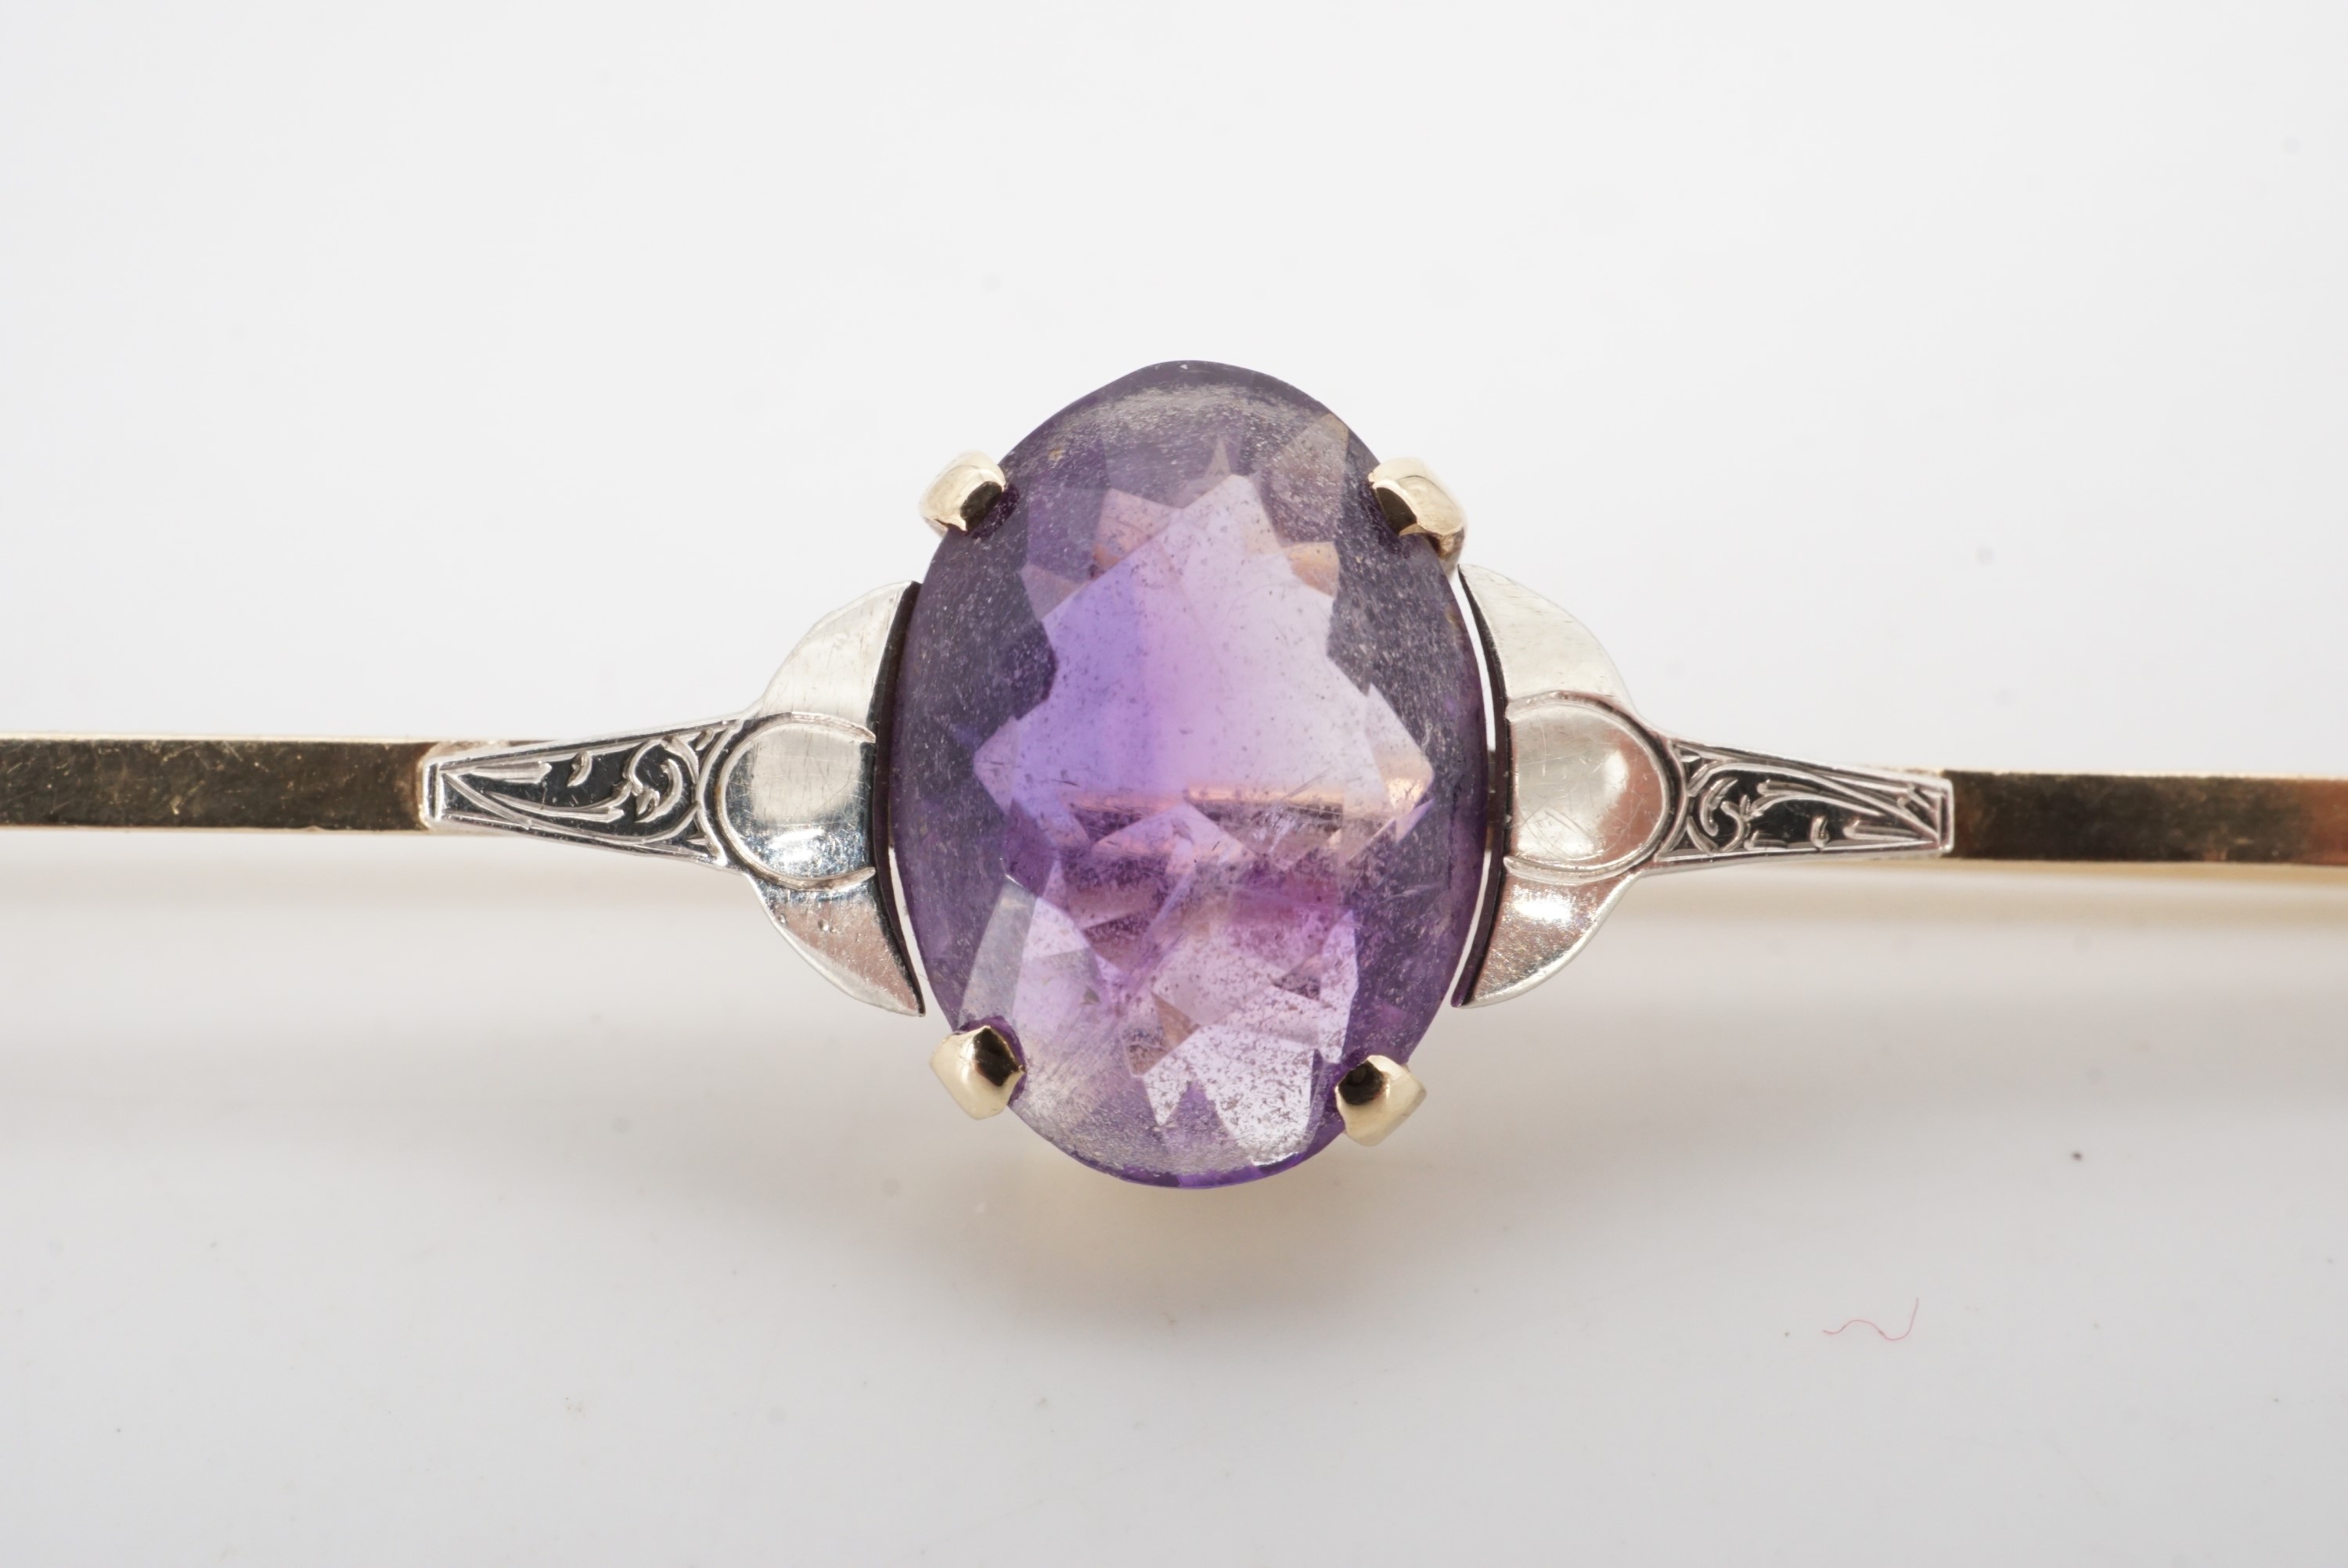 An amethyst and 9 ct gold bar brooch, circa 1930s, stone 11 mm x 8 mm, 6 cm, 3.8 g - Image 2 of 3